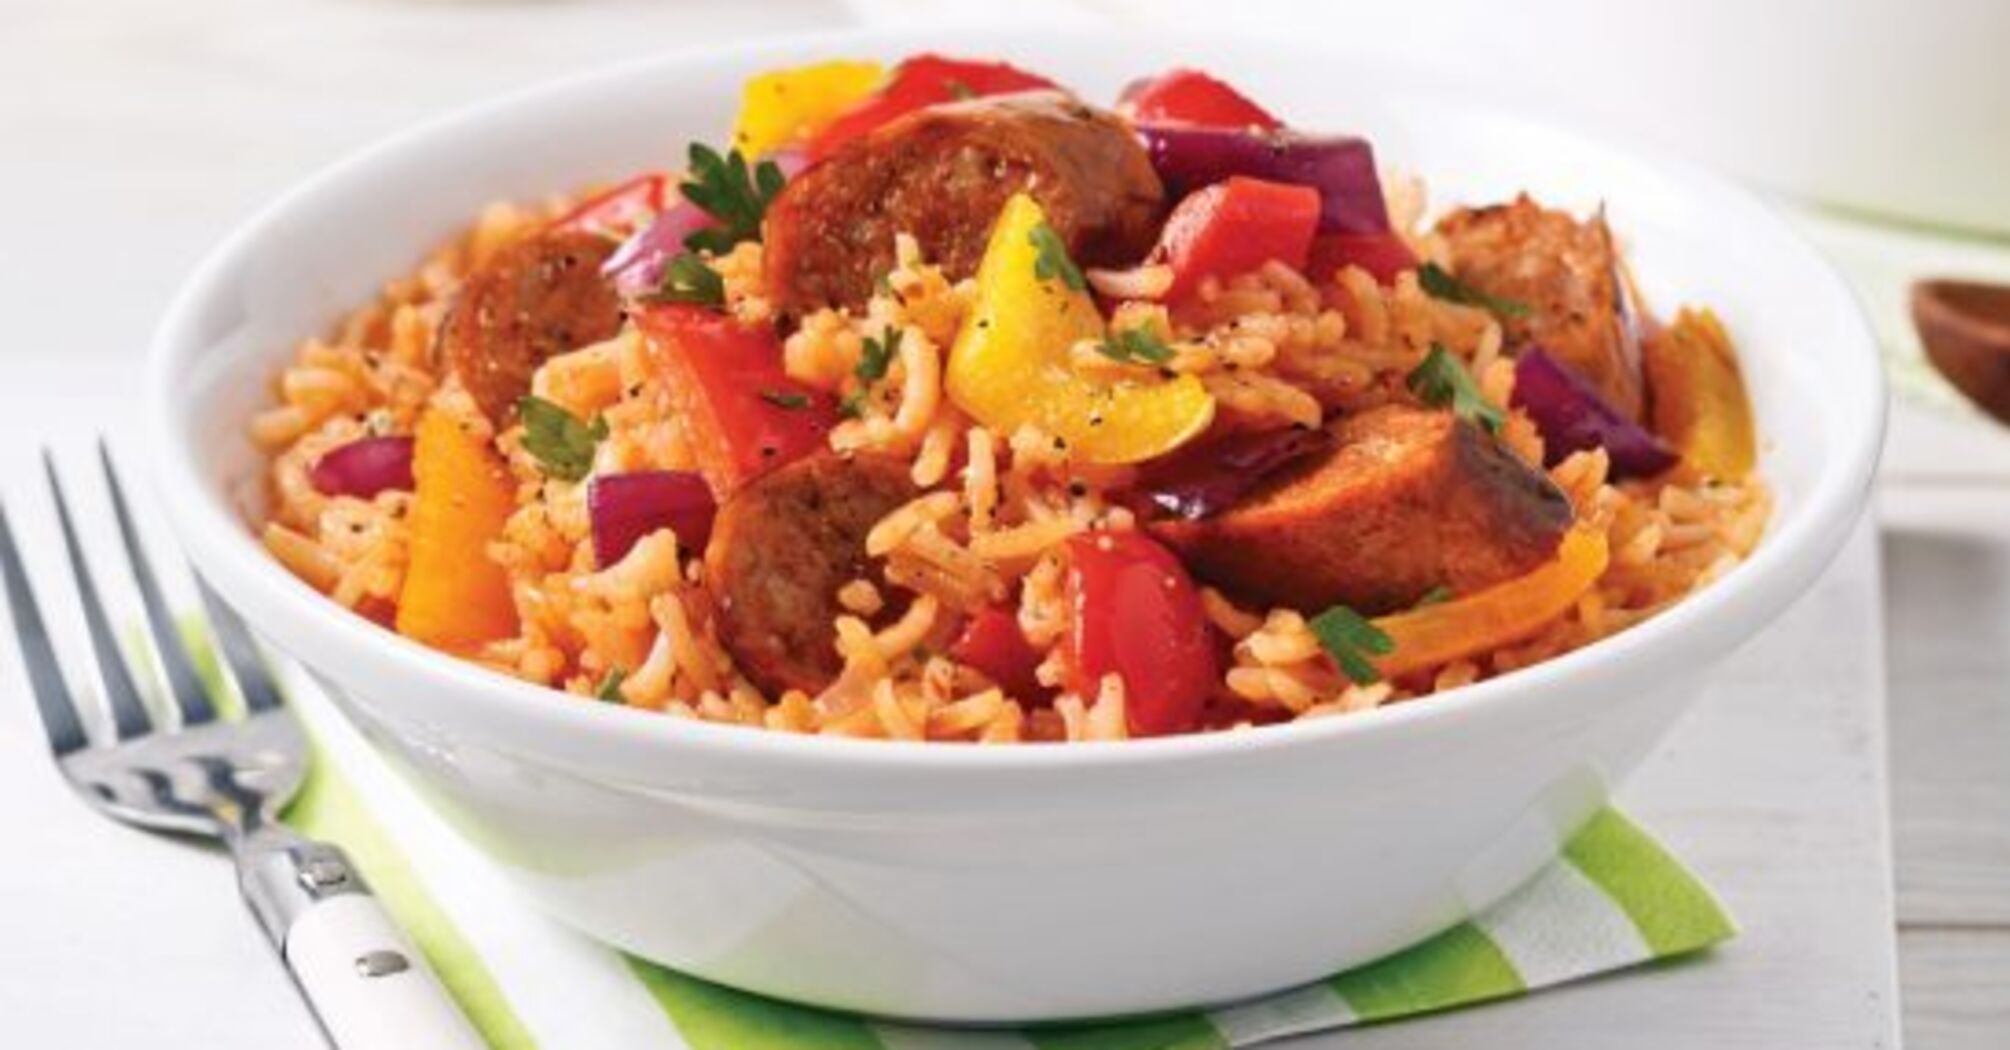 What can replace the usual meat in pilaf: the dish is cooked much faster